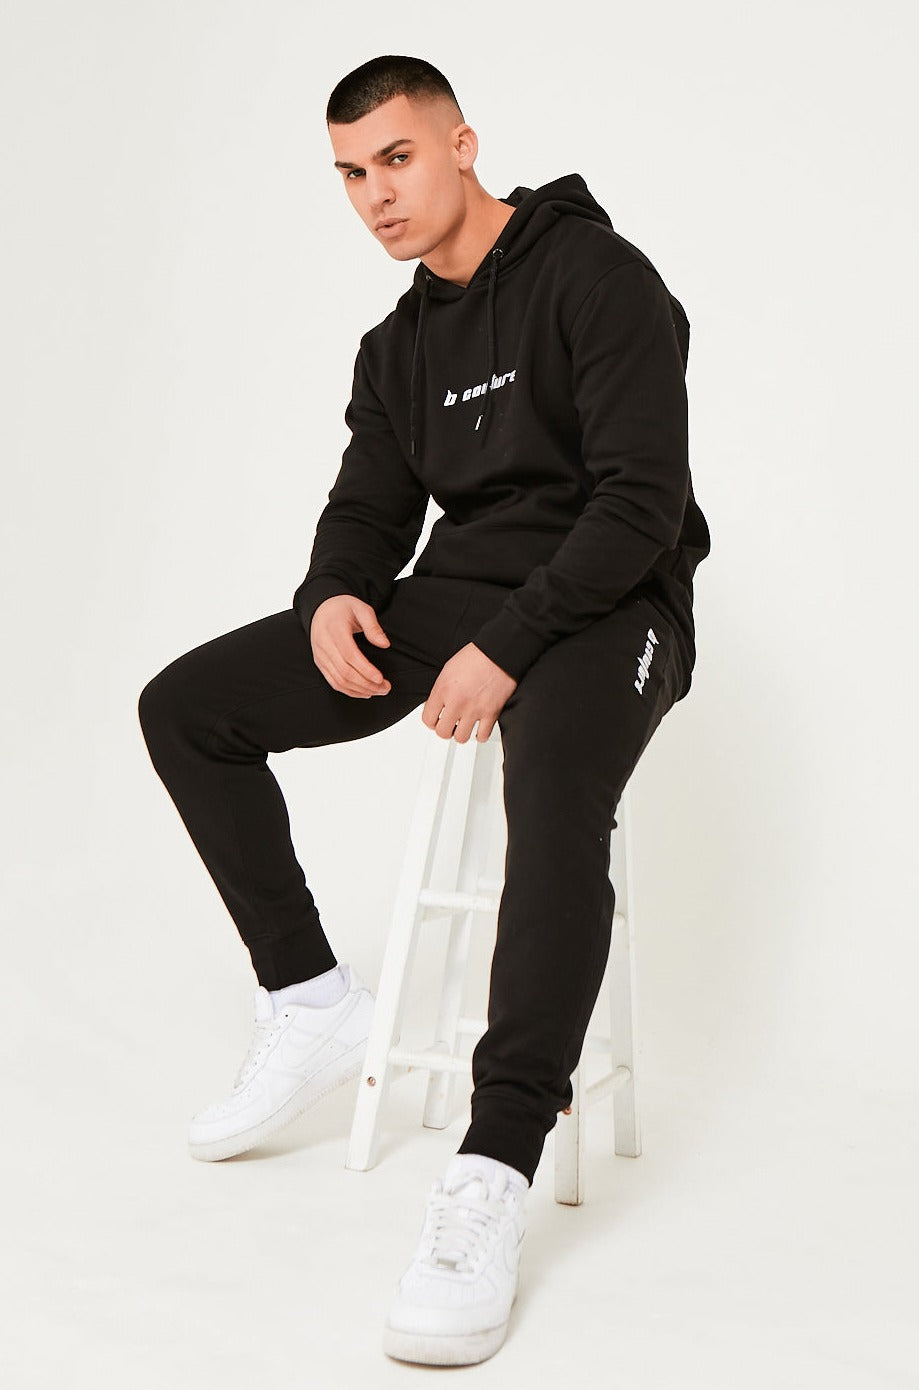 Image of Finchley Road Fleece Tracksuit - Black